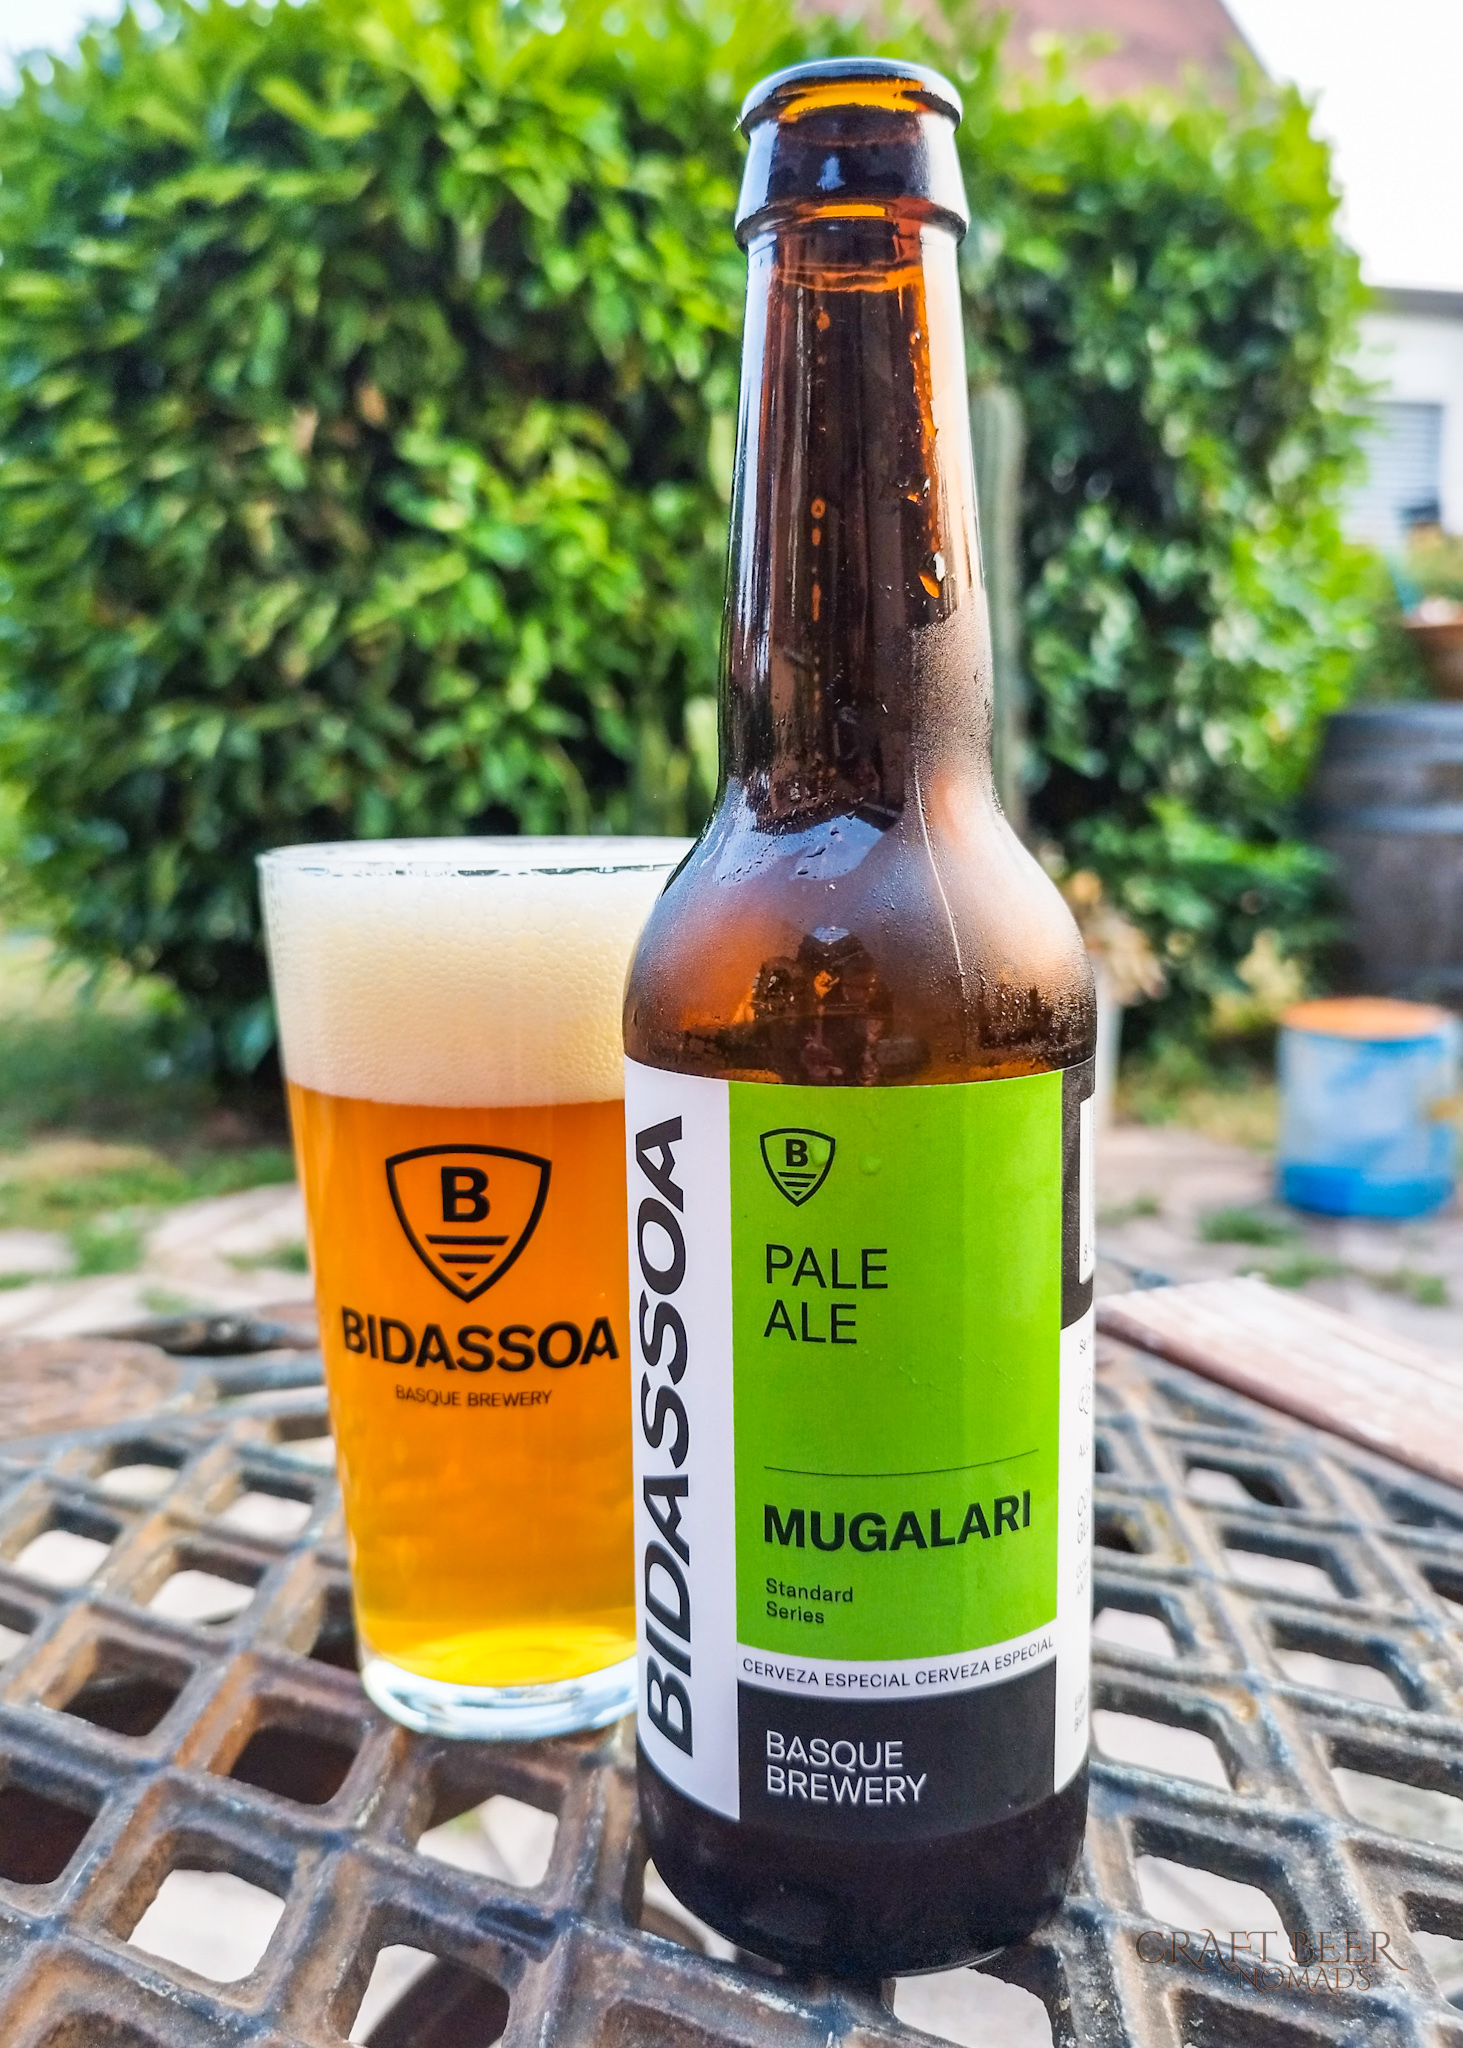 Mugalari Pale Ale | Craft beer in the Basque Country: Bidassoa Basque Brewery | Craft Beer Nomads